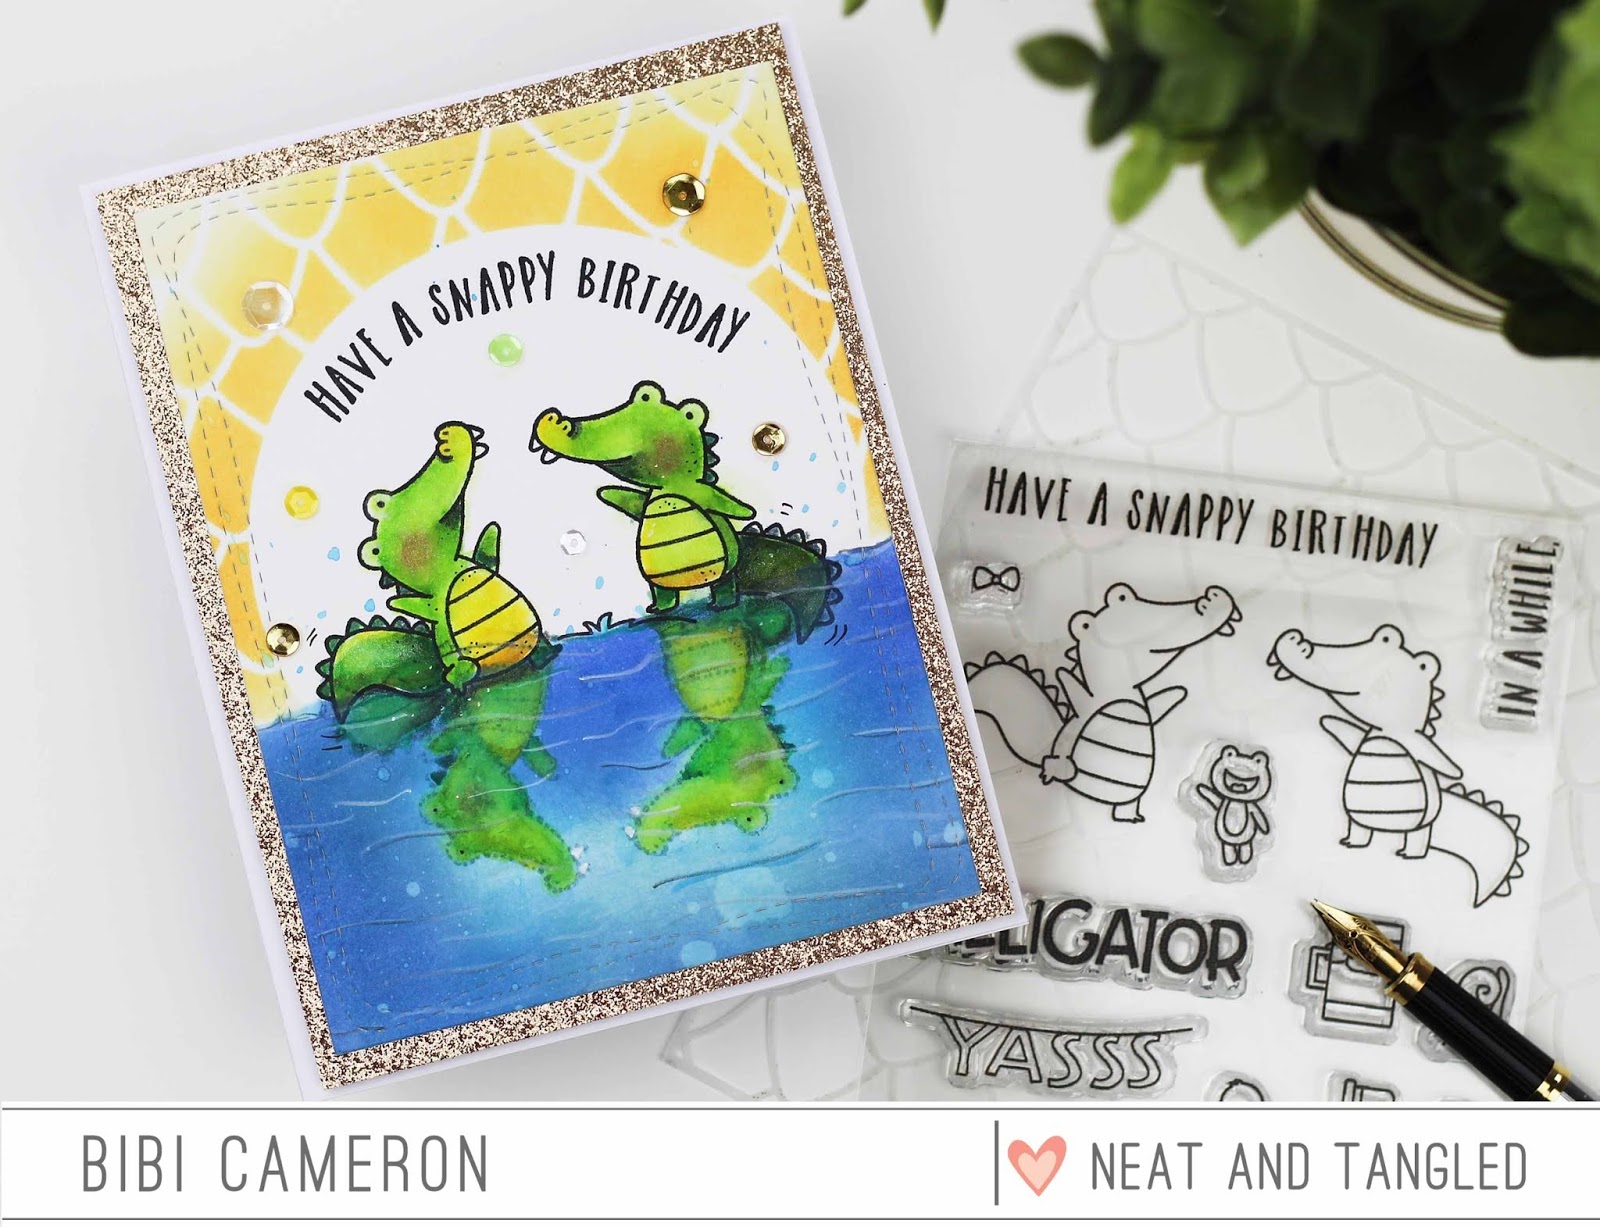 Stamping reflections on water with Later Alligator by Neat and Tangled | Video Post